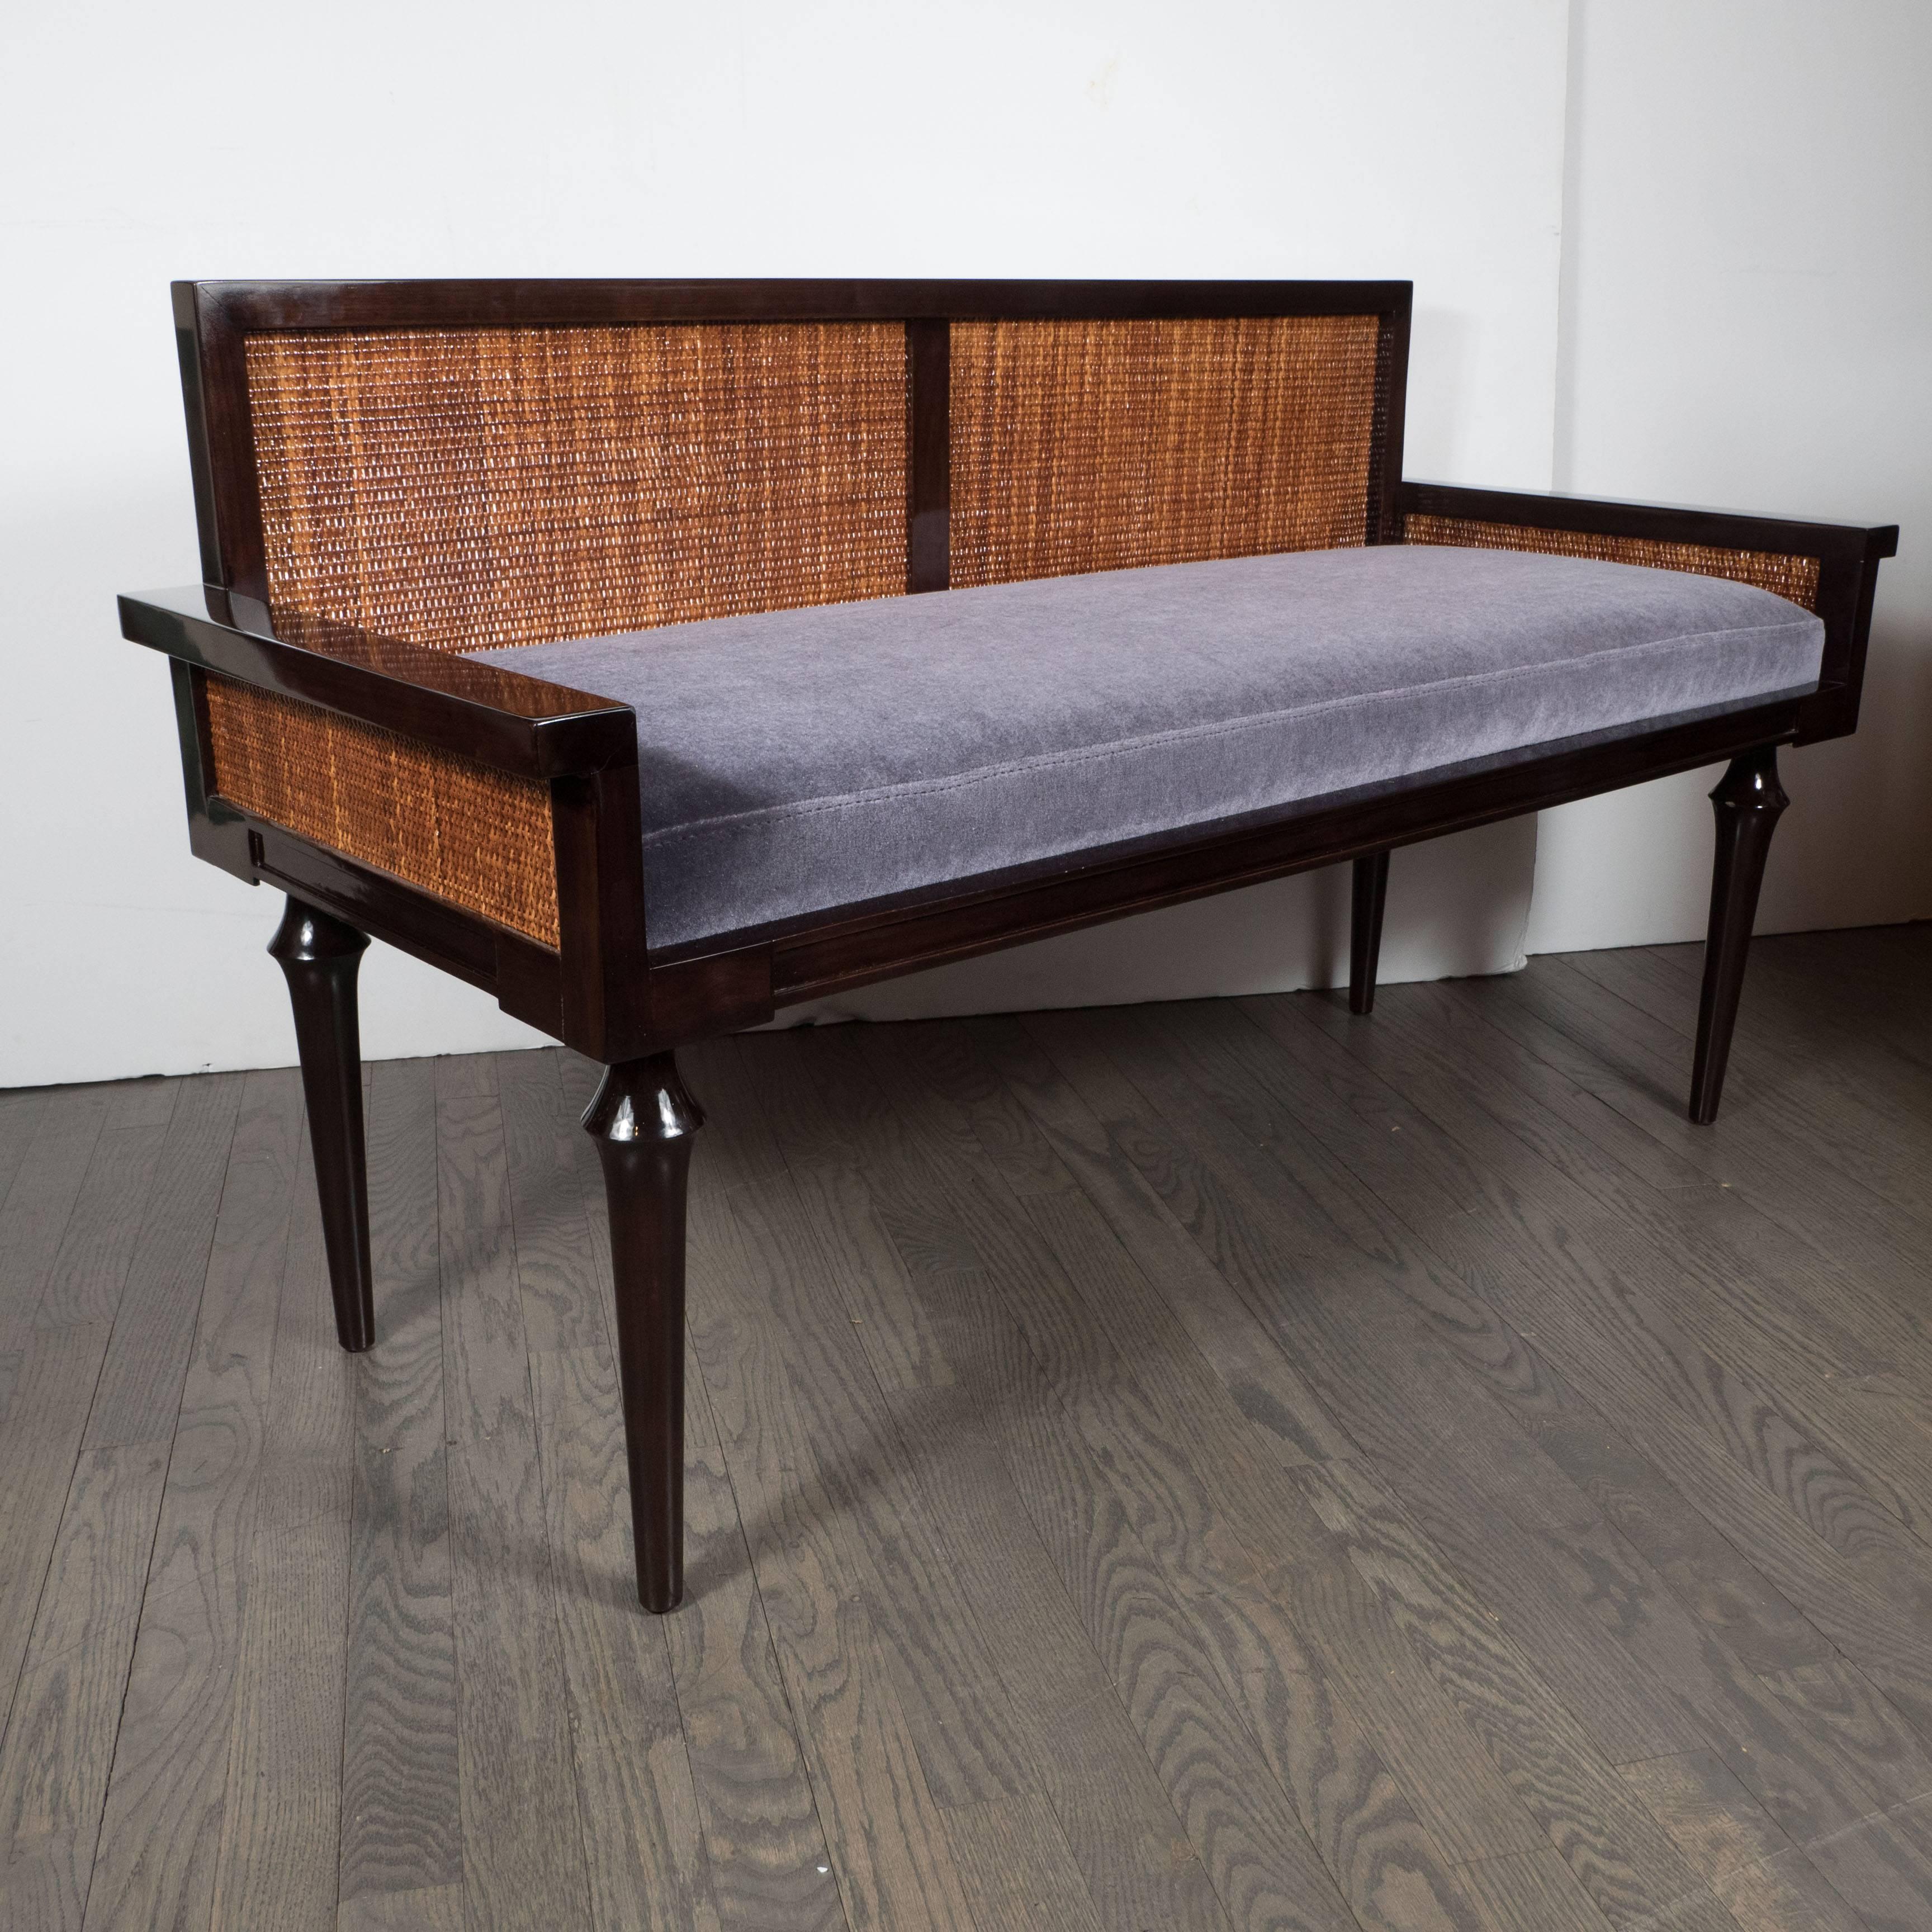 American Mid-Century Modernist Bench in Ebonized Walnut with Inset Caning and Mohair